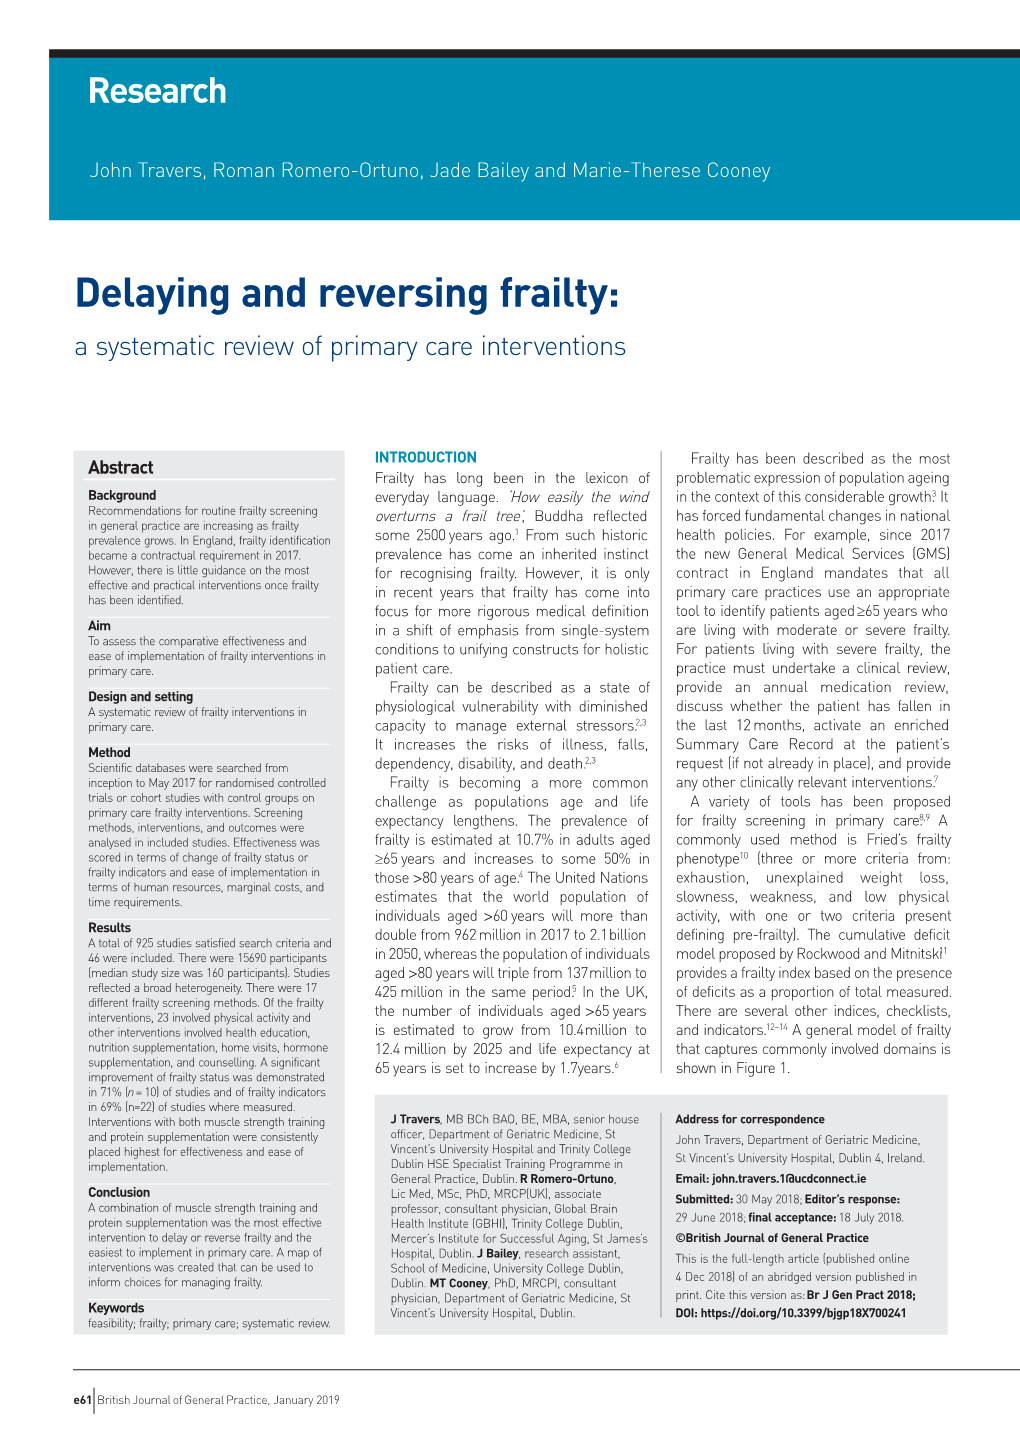 Delaying and Reversing Frailty: a Systematic Review of Primary Care Interventions